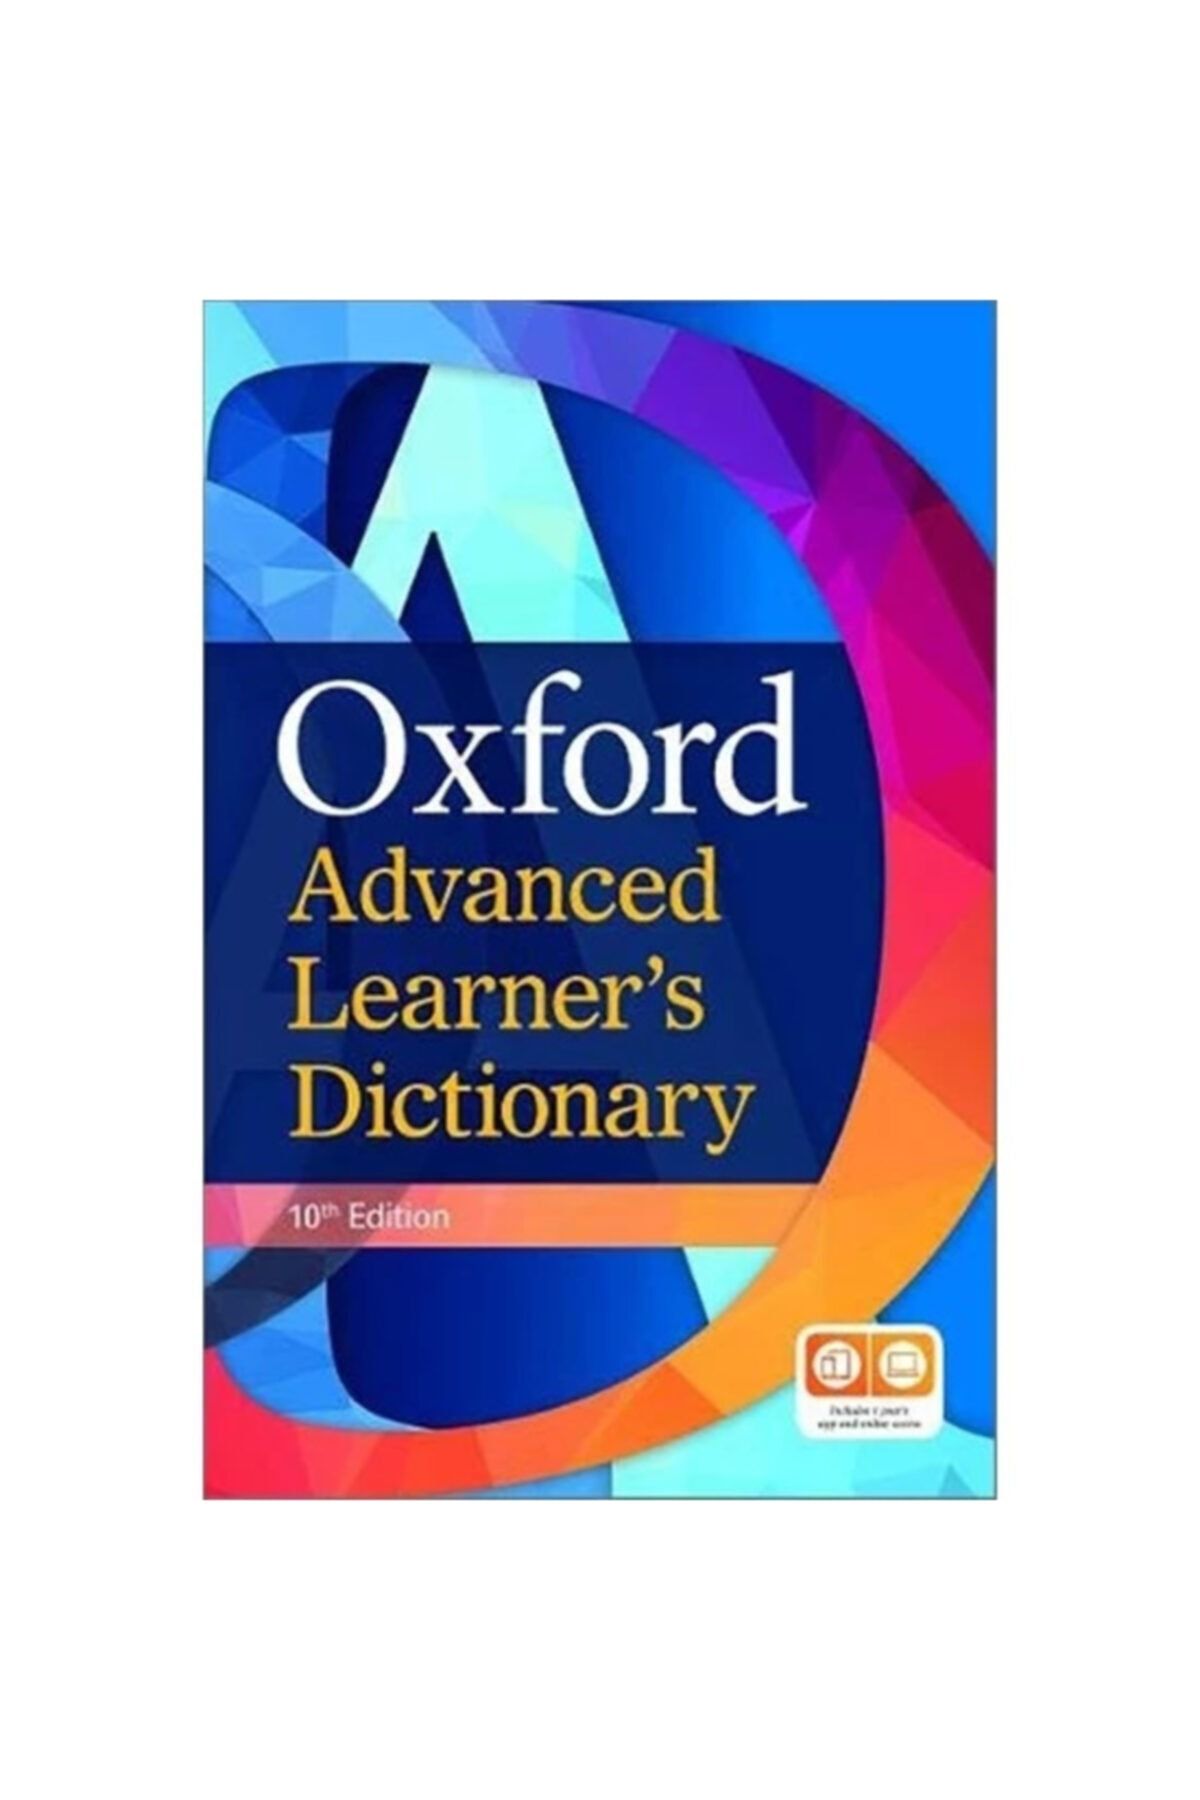 Advanced learner s dictionary. Oxford Advanced Learner's Dictionary 10th Edition. Oxford Advanced Learner's Dictionary книга. Oxford Dictionary for Advanced Learners. Oxford Advanced.